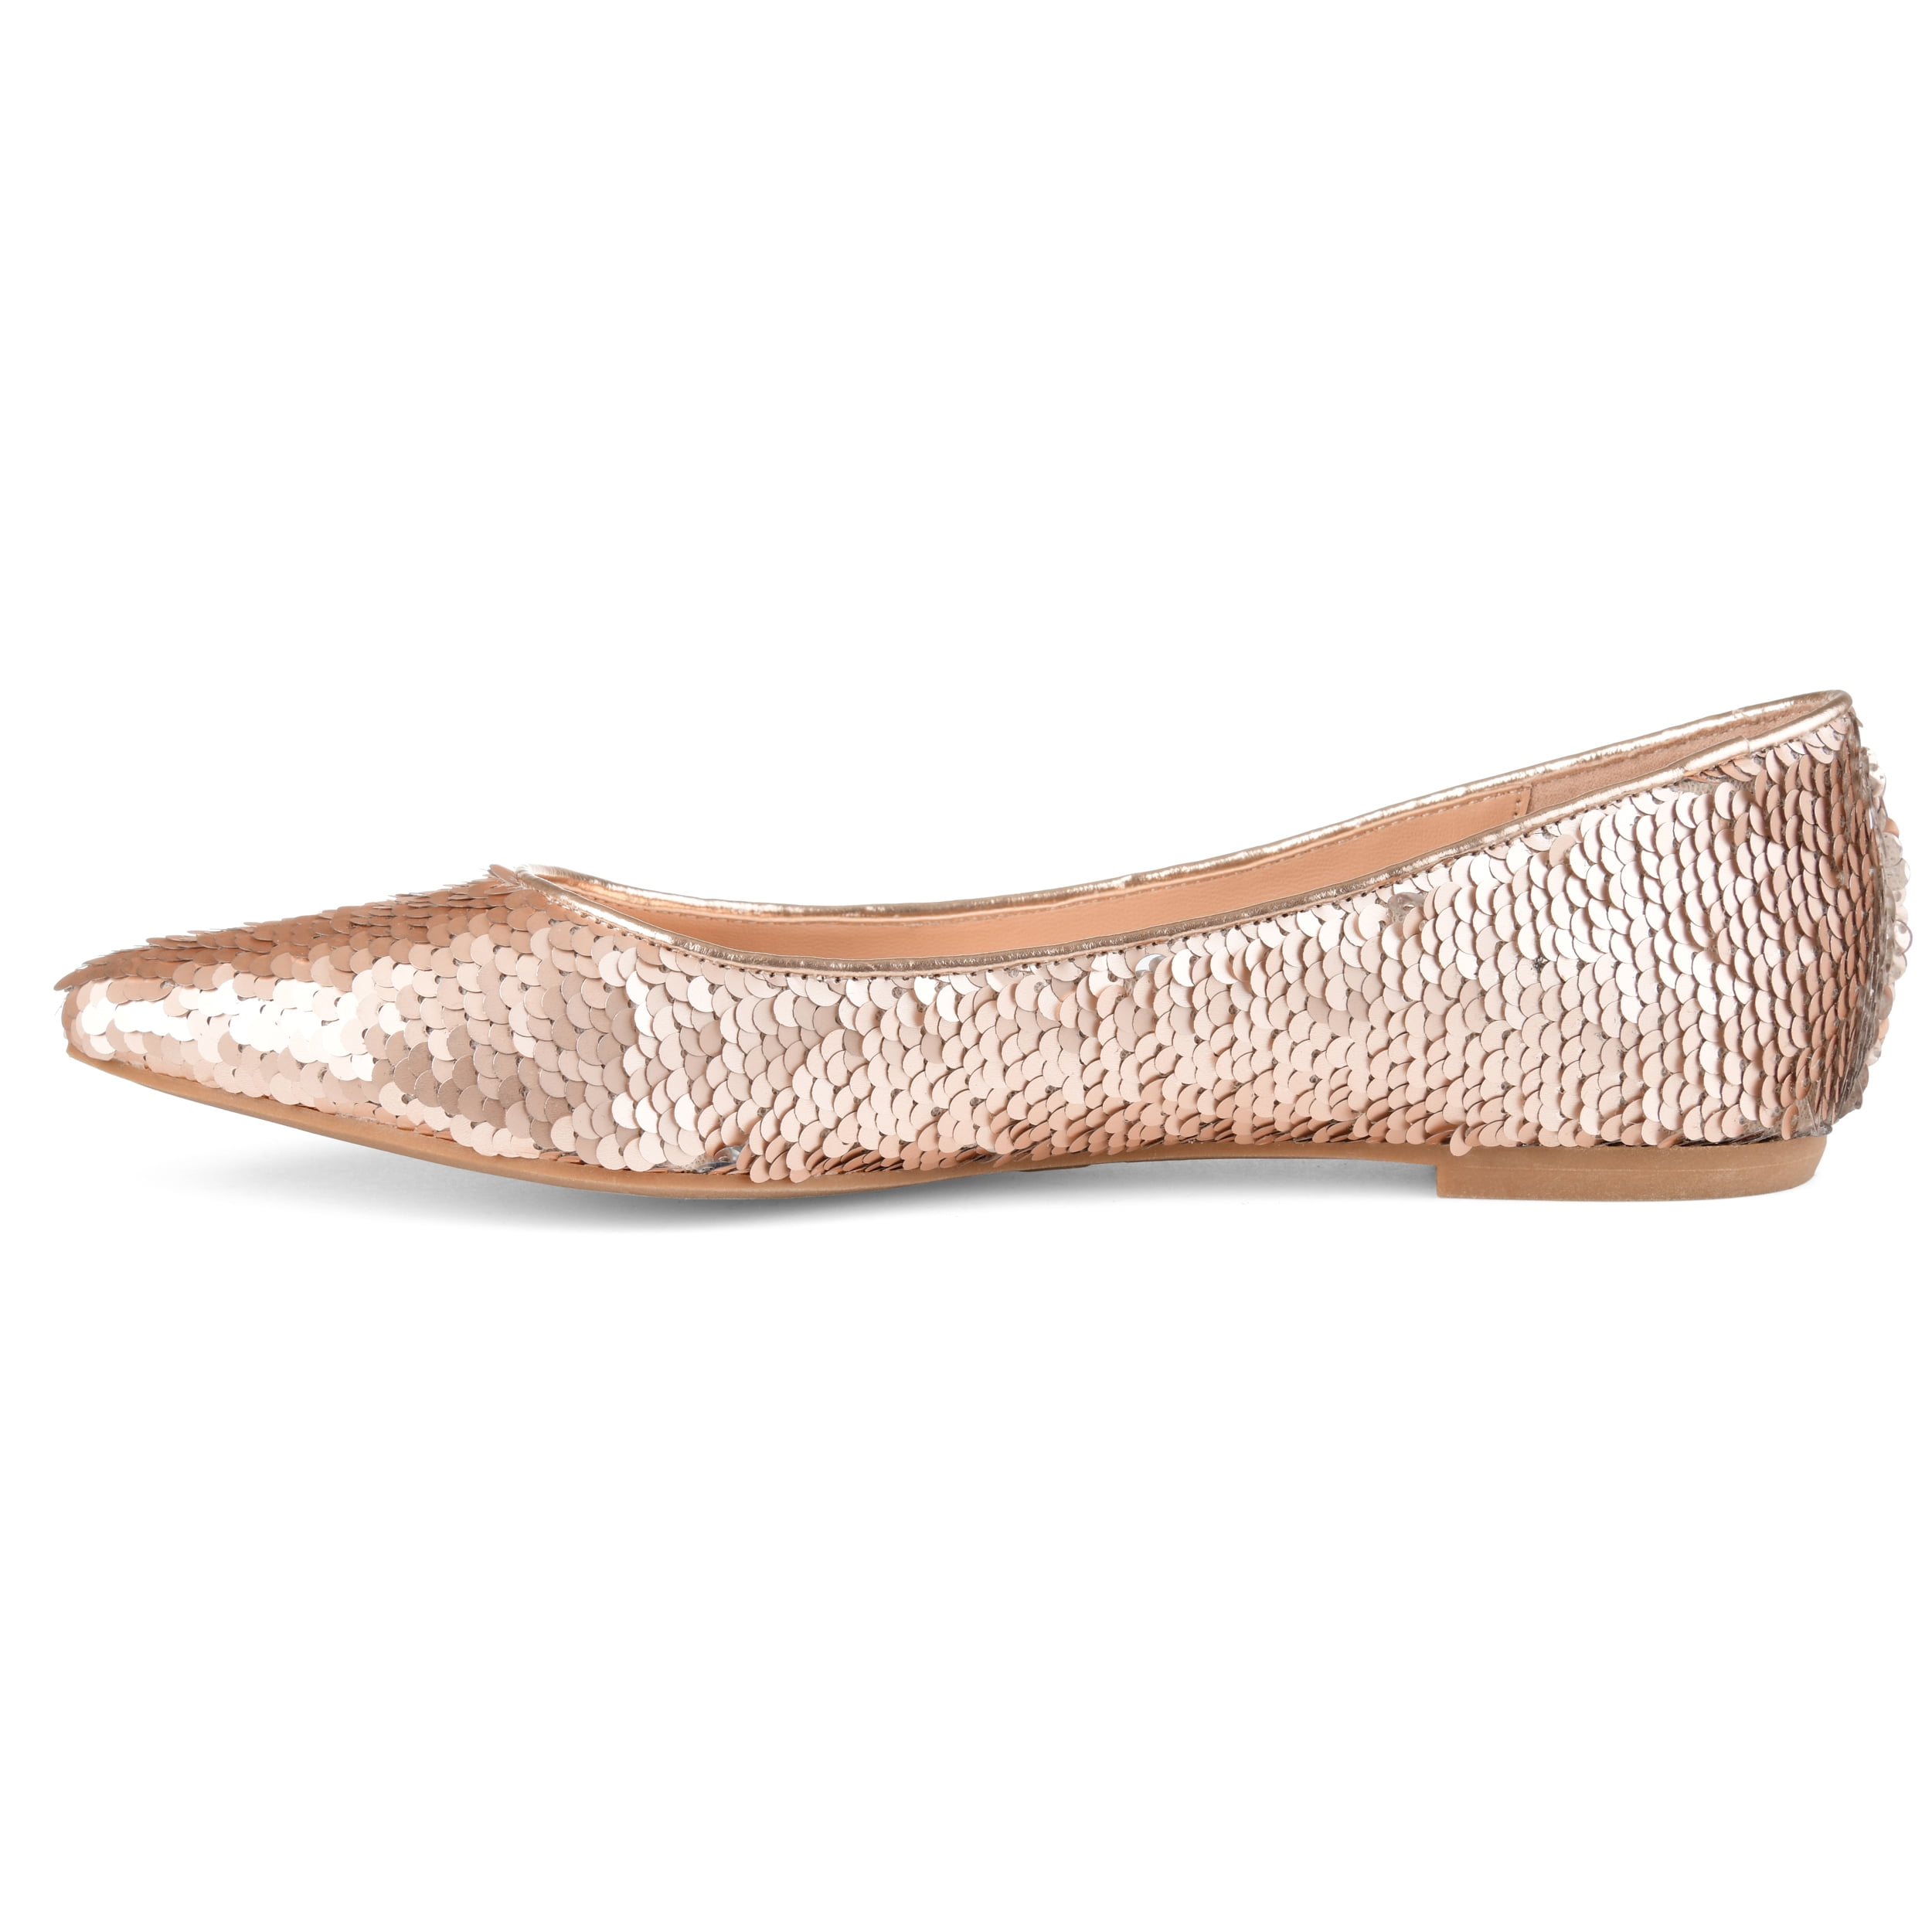 Brinley Co Womens Calico Pointed Toe Metallic Sequin Flats